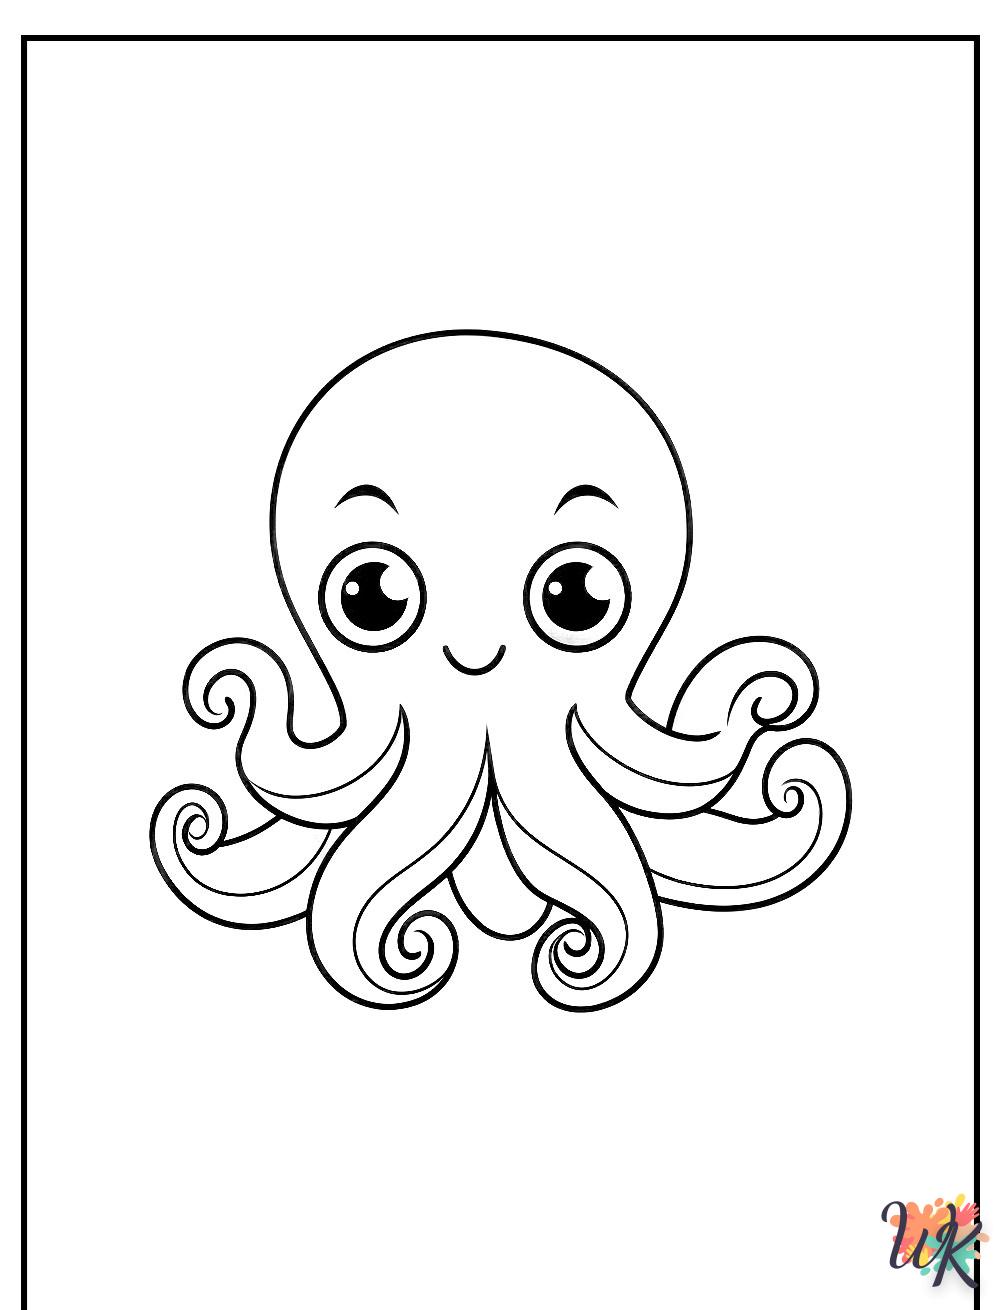 Octopus coloring online for 2 year old baby